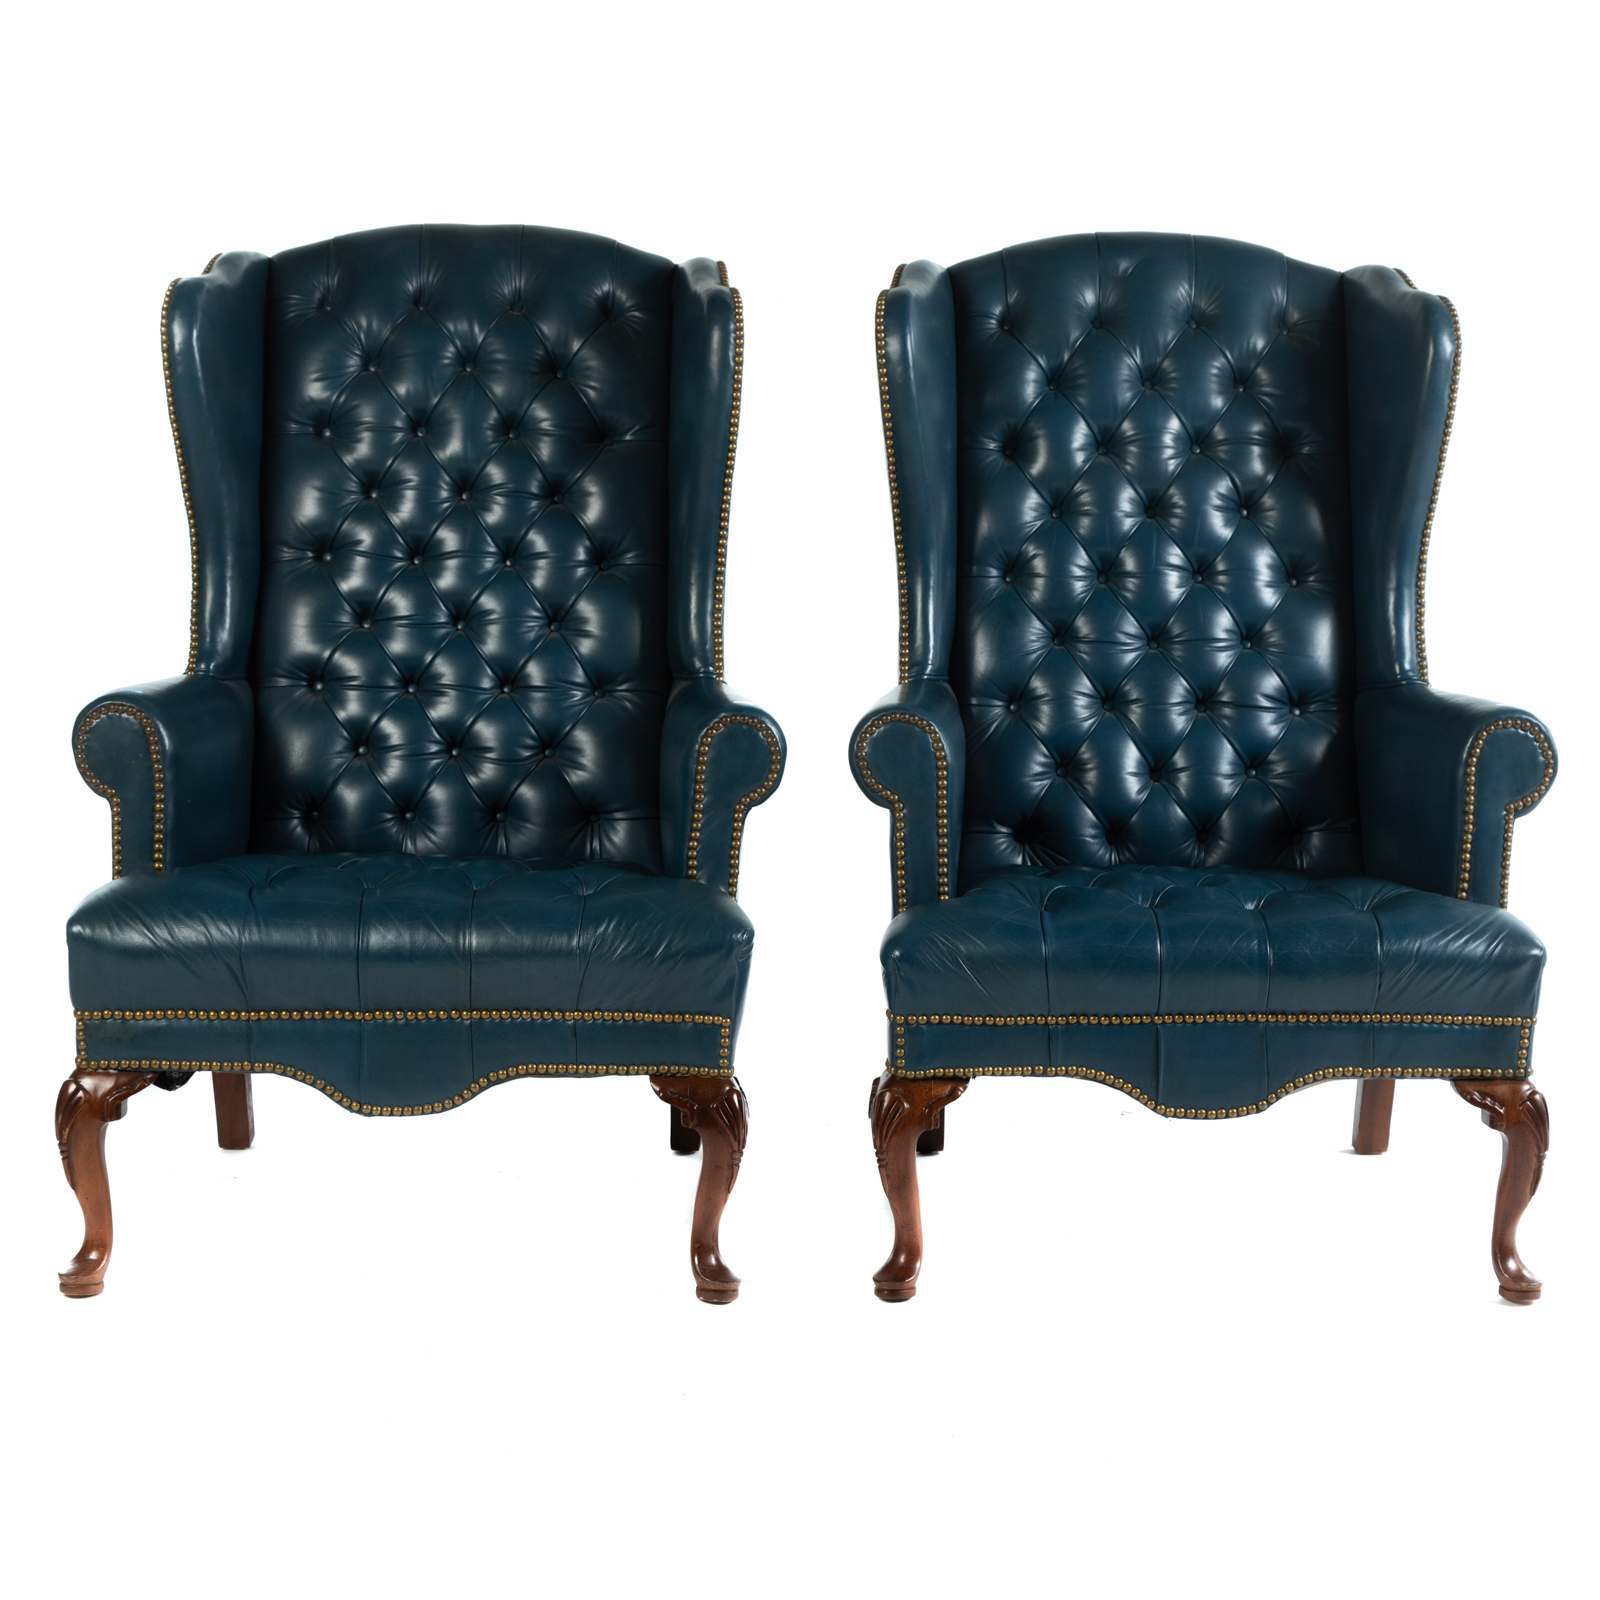 A PAIR OF CLASSIC LEATHER TUFTED